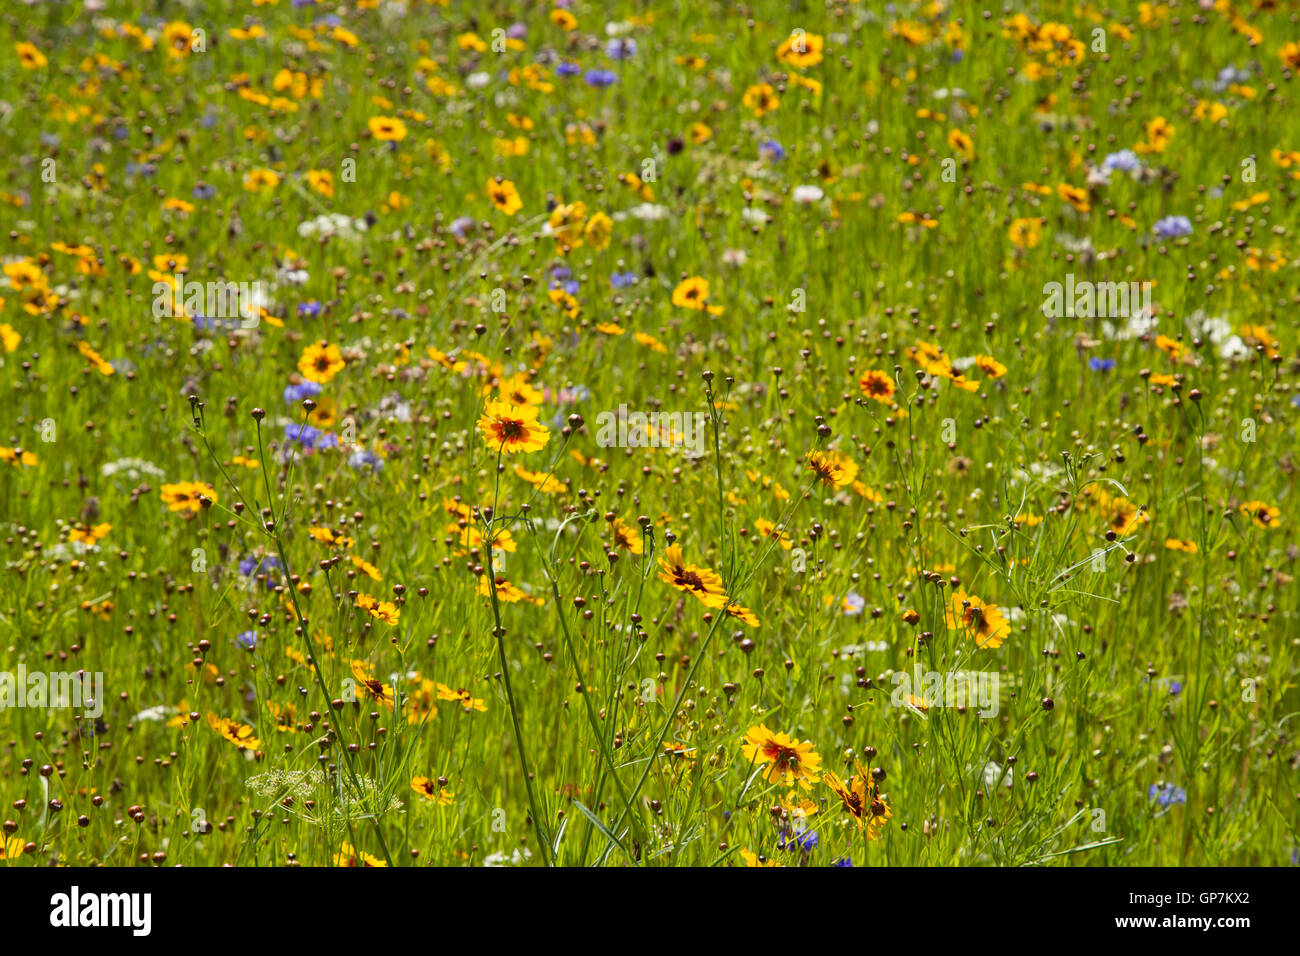 Wildflower meadow in full sun, full of brightly coloured summer flowers Stock Photo